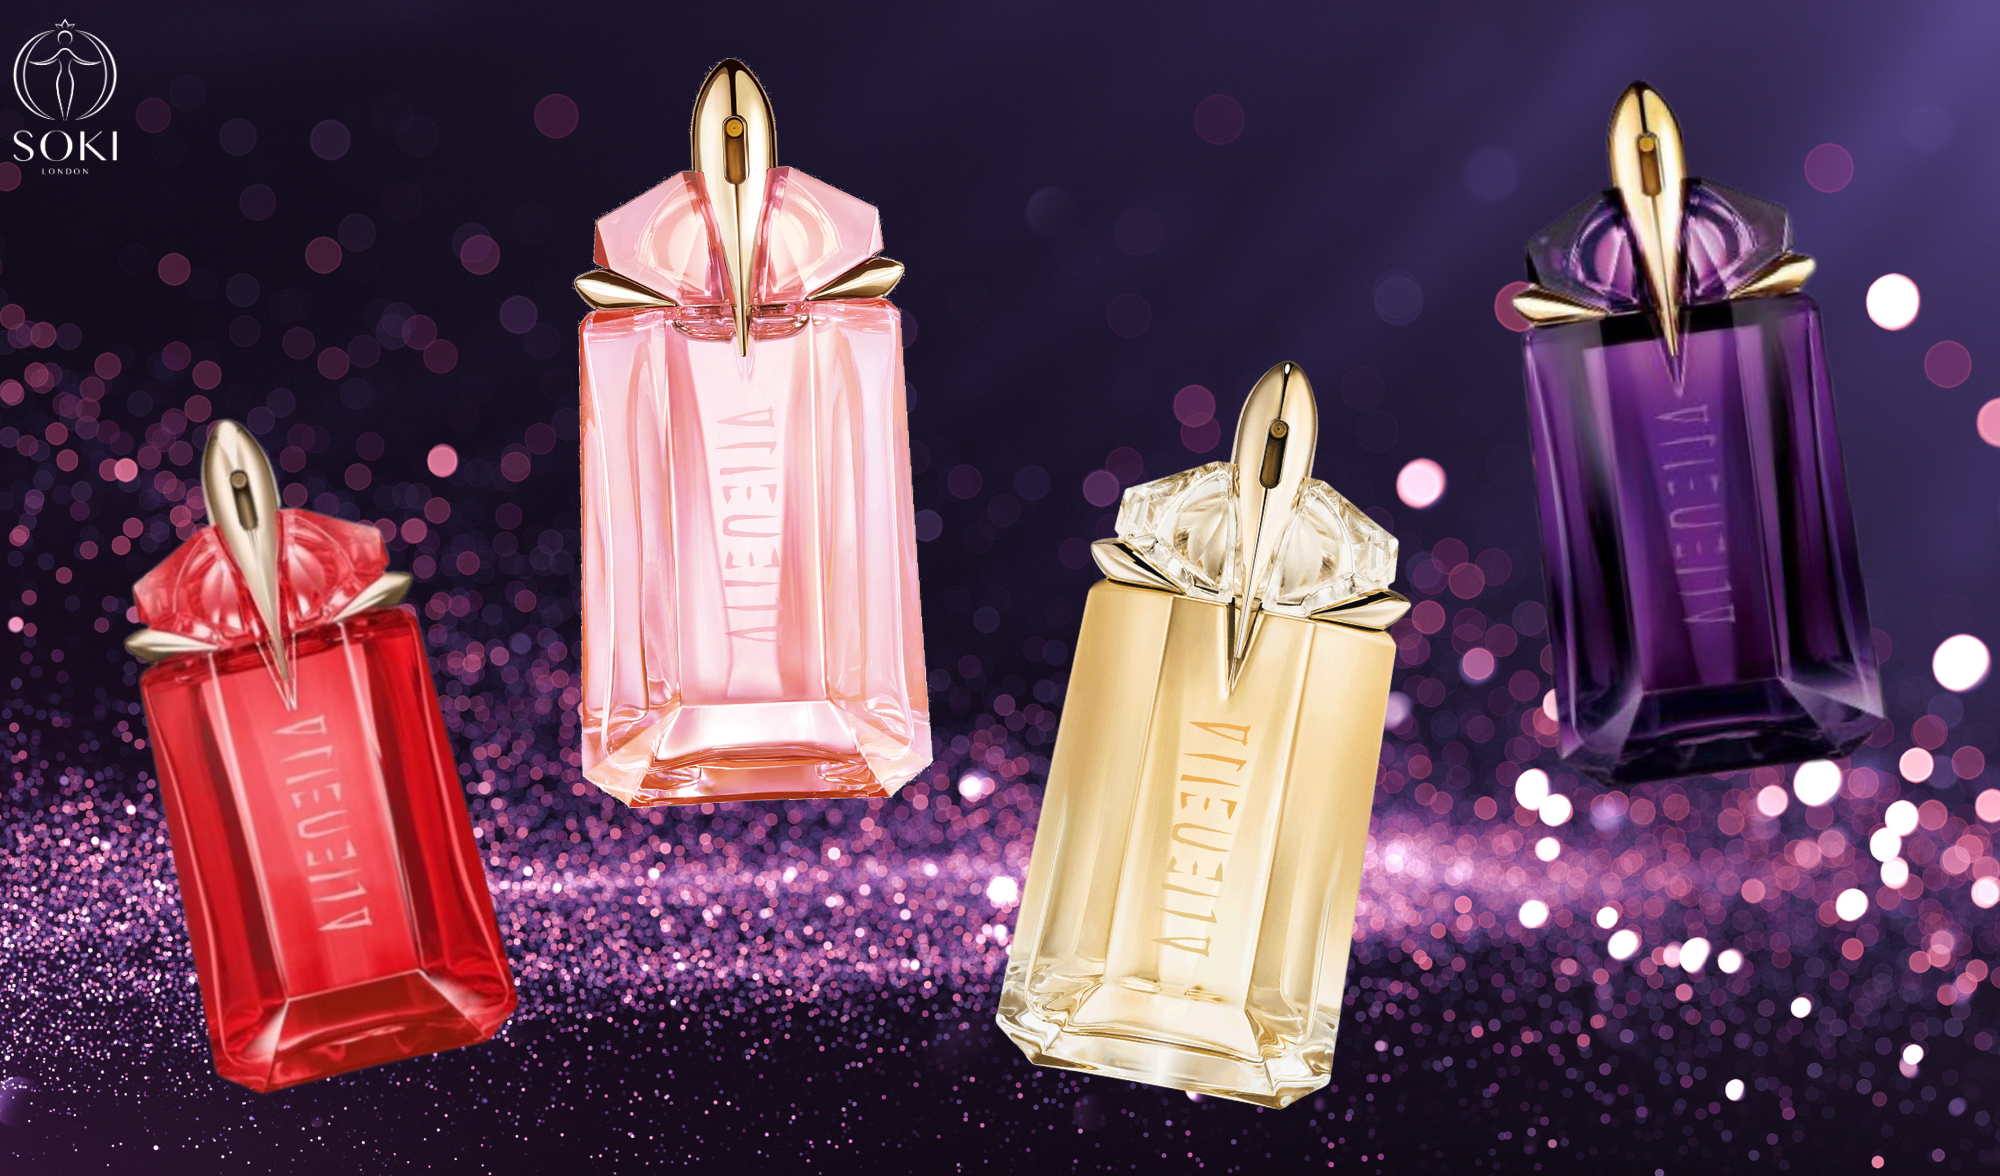 The Ultimate Guide To The Mugler Alien Perfumes